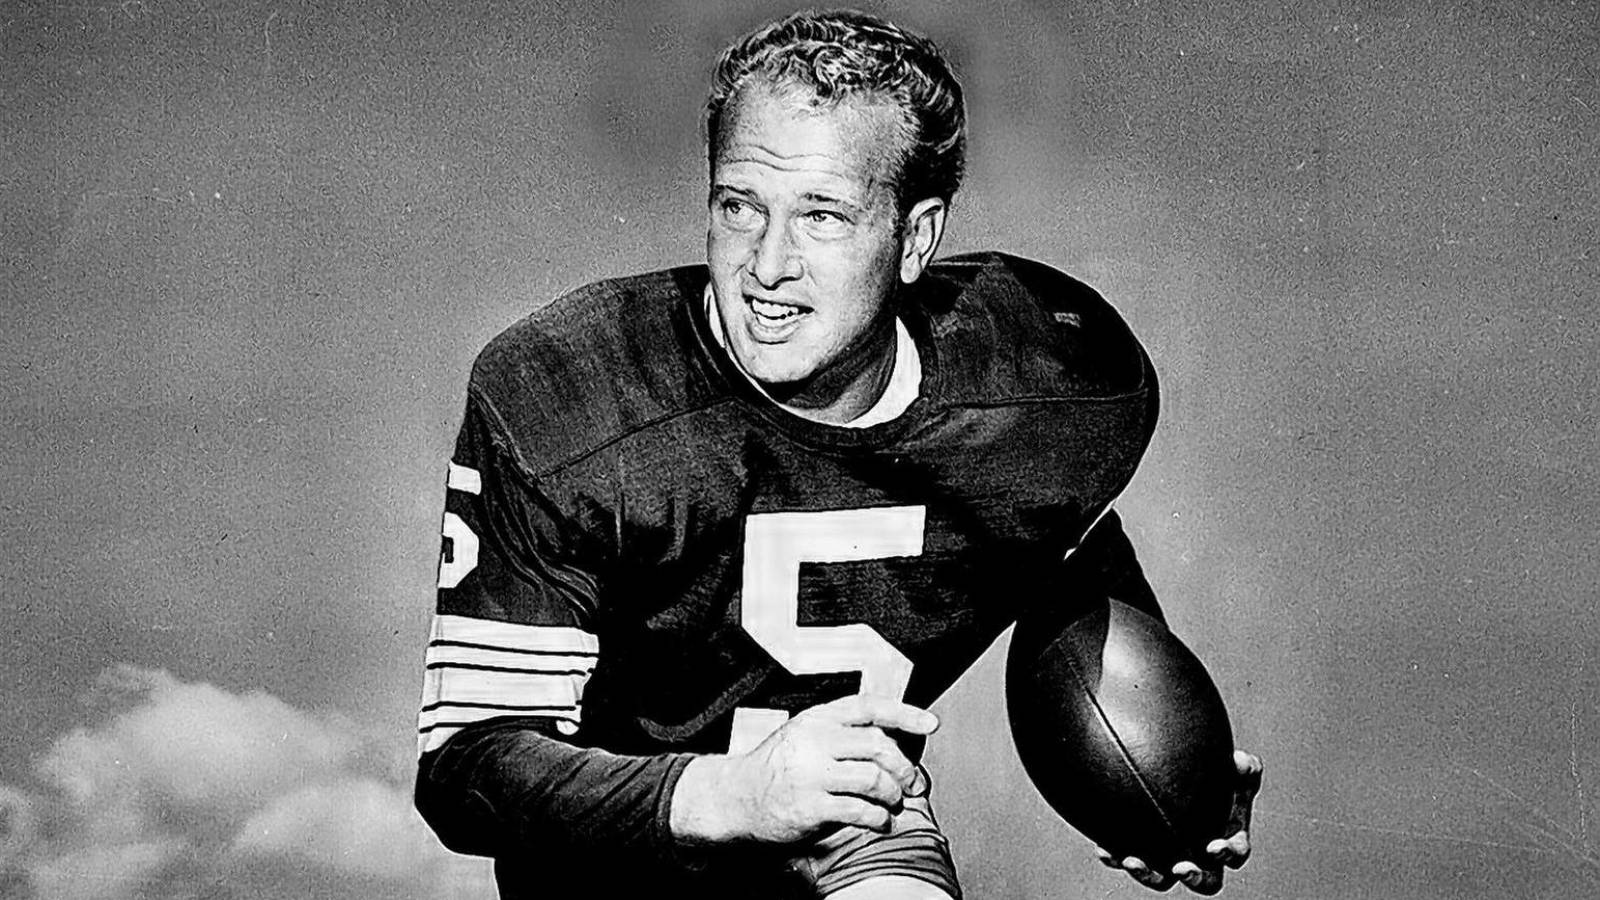 Packers legend Paul Hornung dead at 84 after battle with dementia